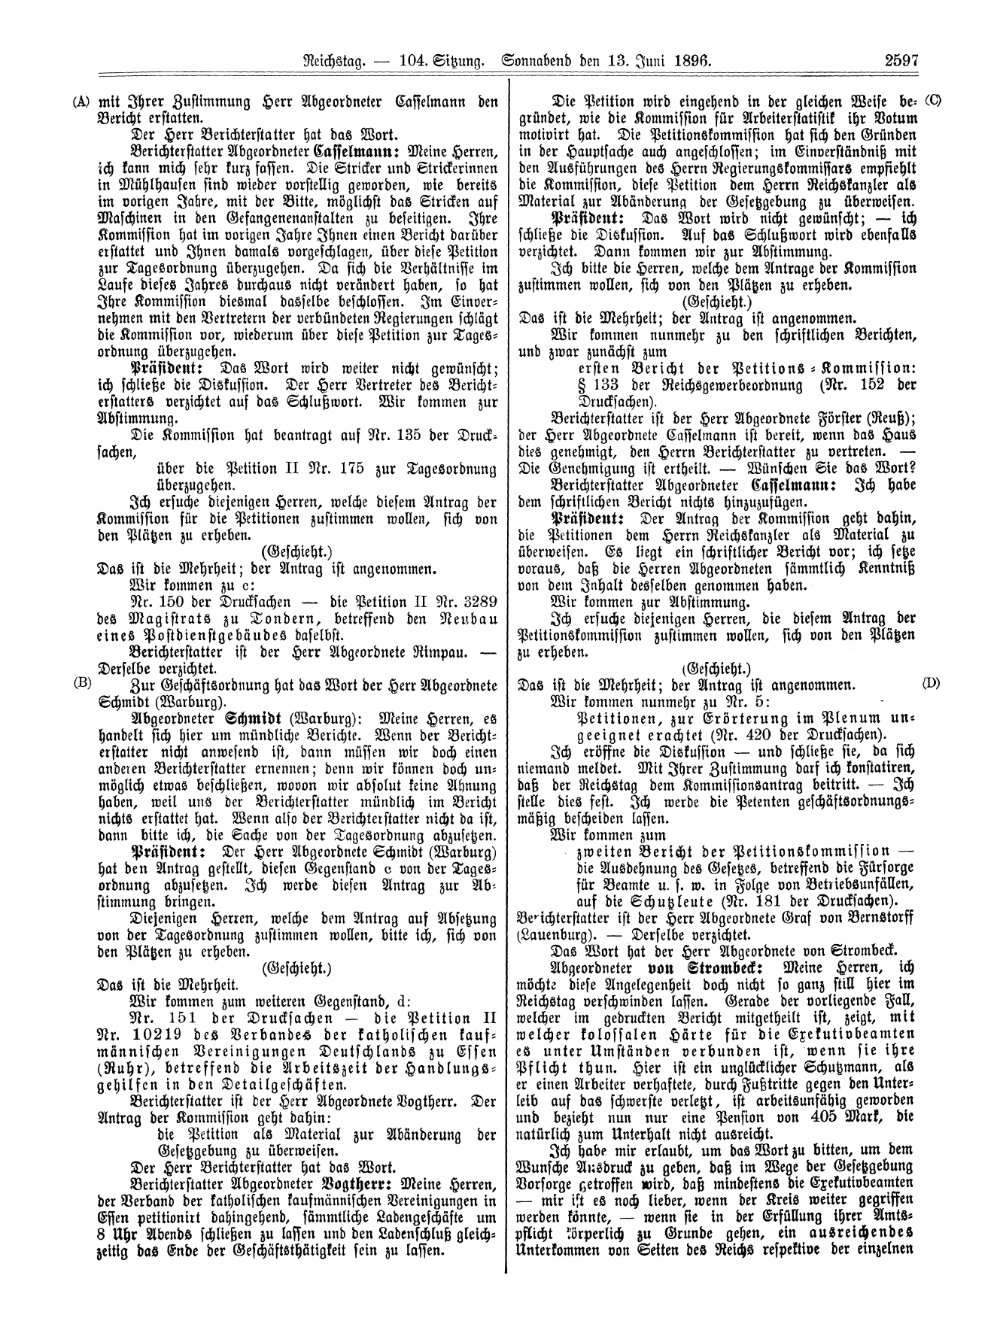 Scan of page 2597